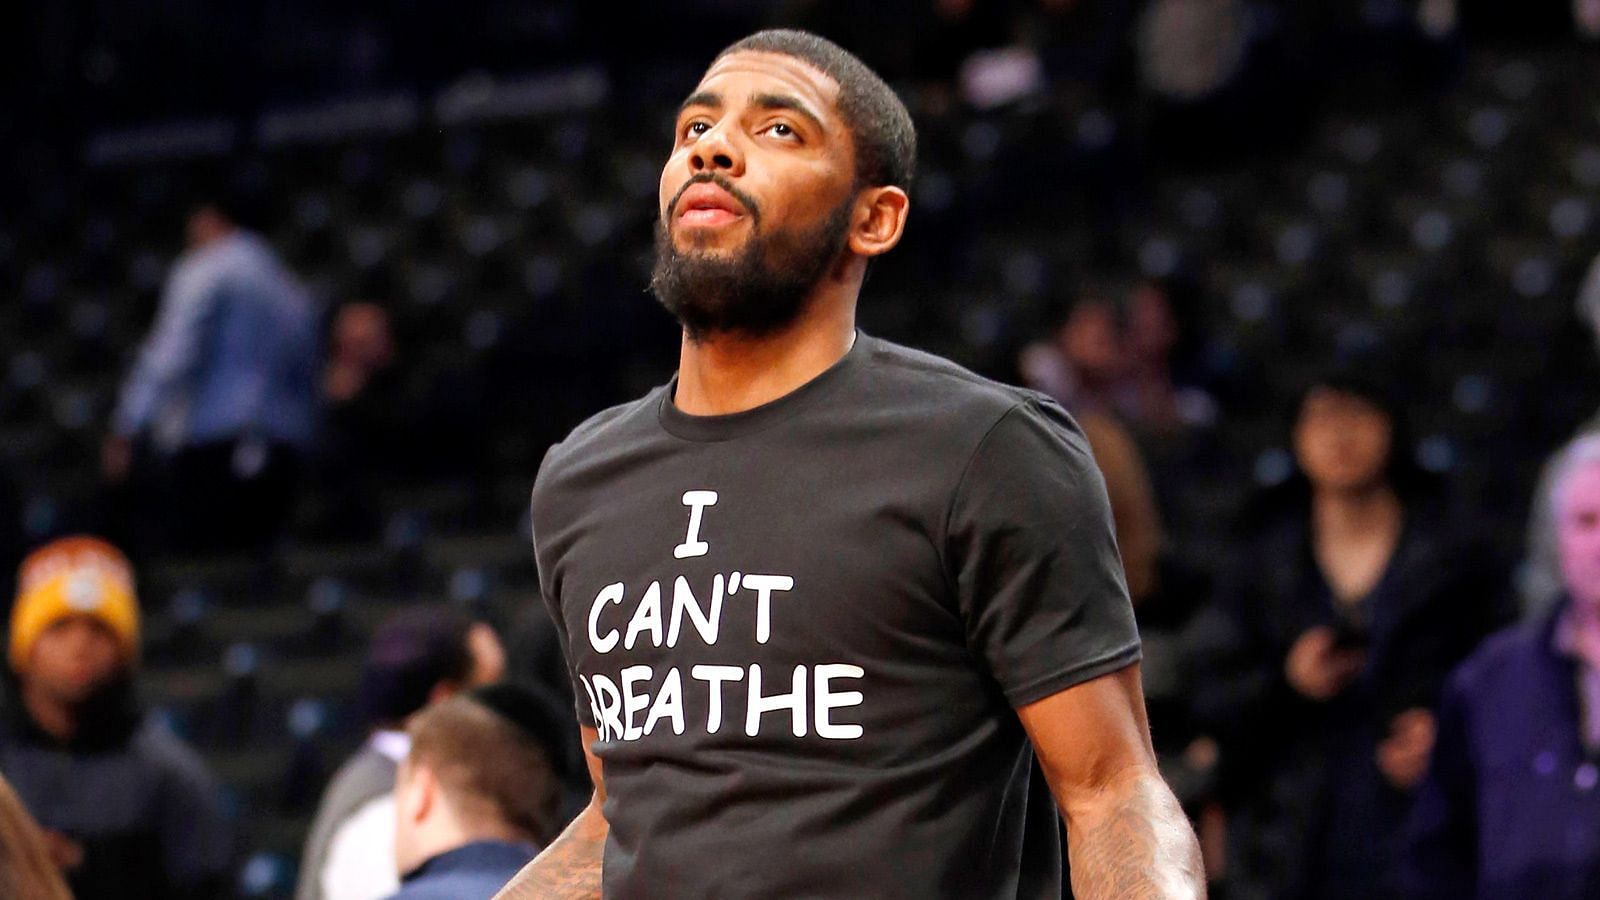 Kyrie Irving participating in the &quot;I Can&#039;t Breathe&quot; social justice movement back in 2014